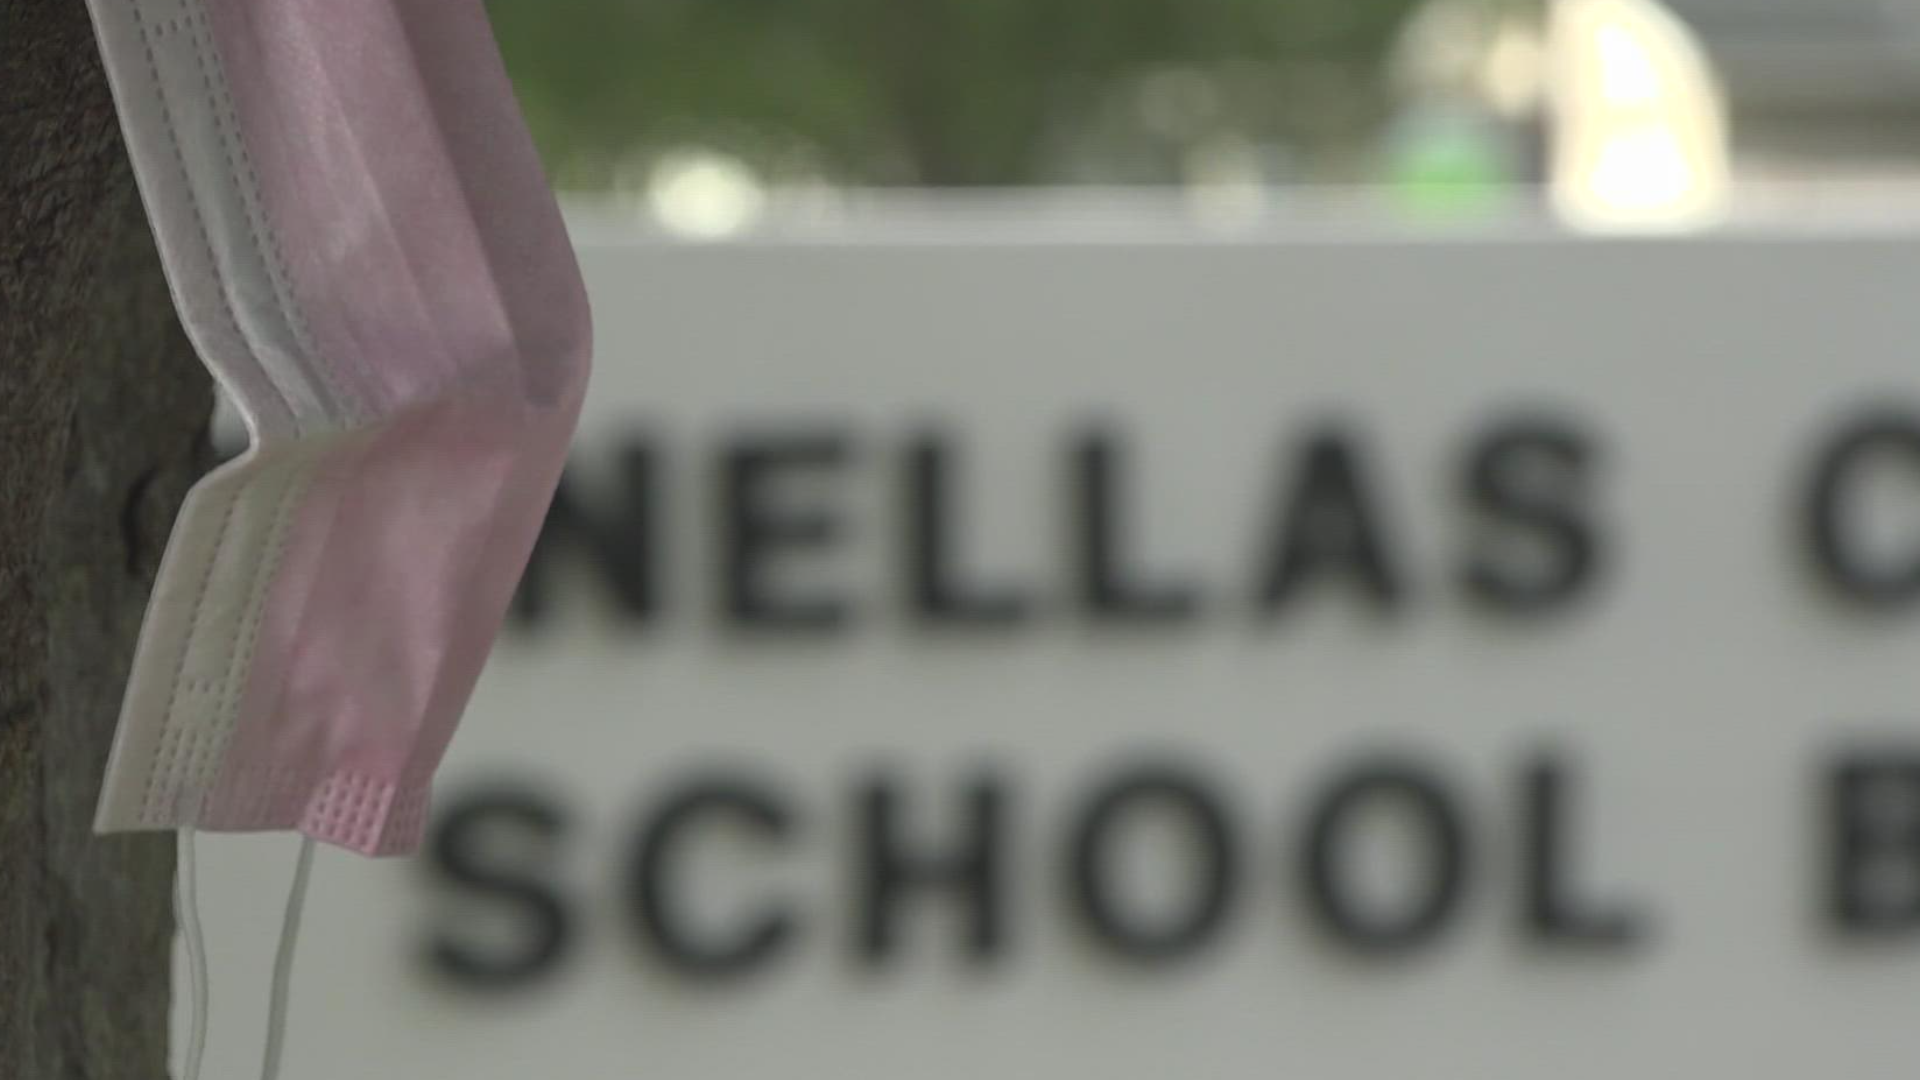 Some parents believe Pinellas County public school leaders should implement a mask mandate for the upcoming school year.